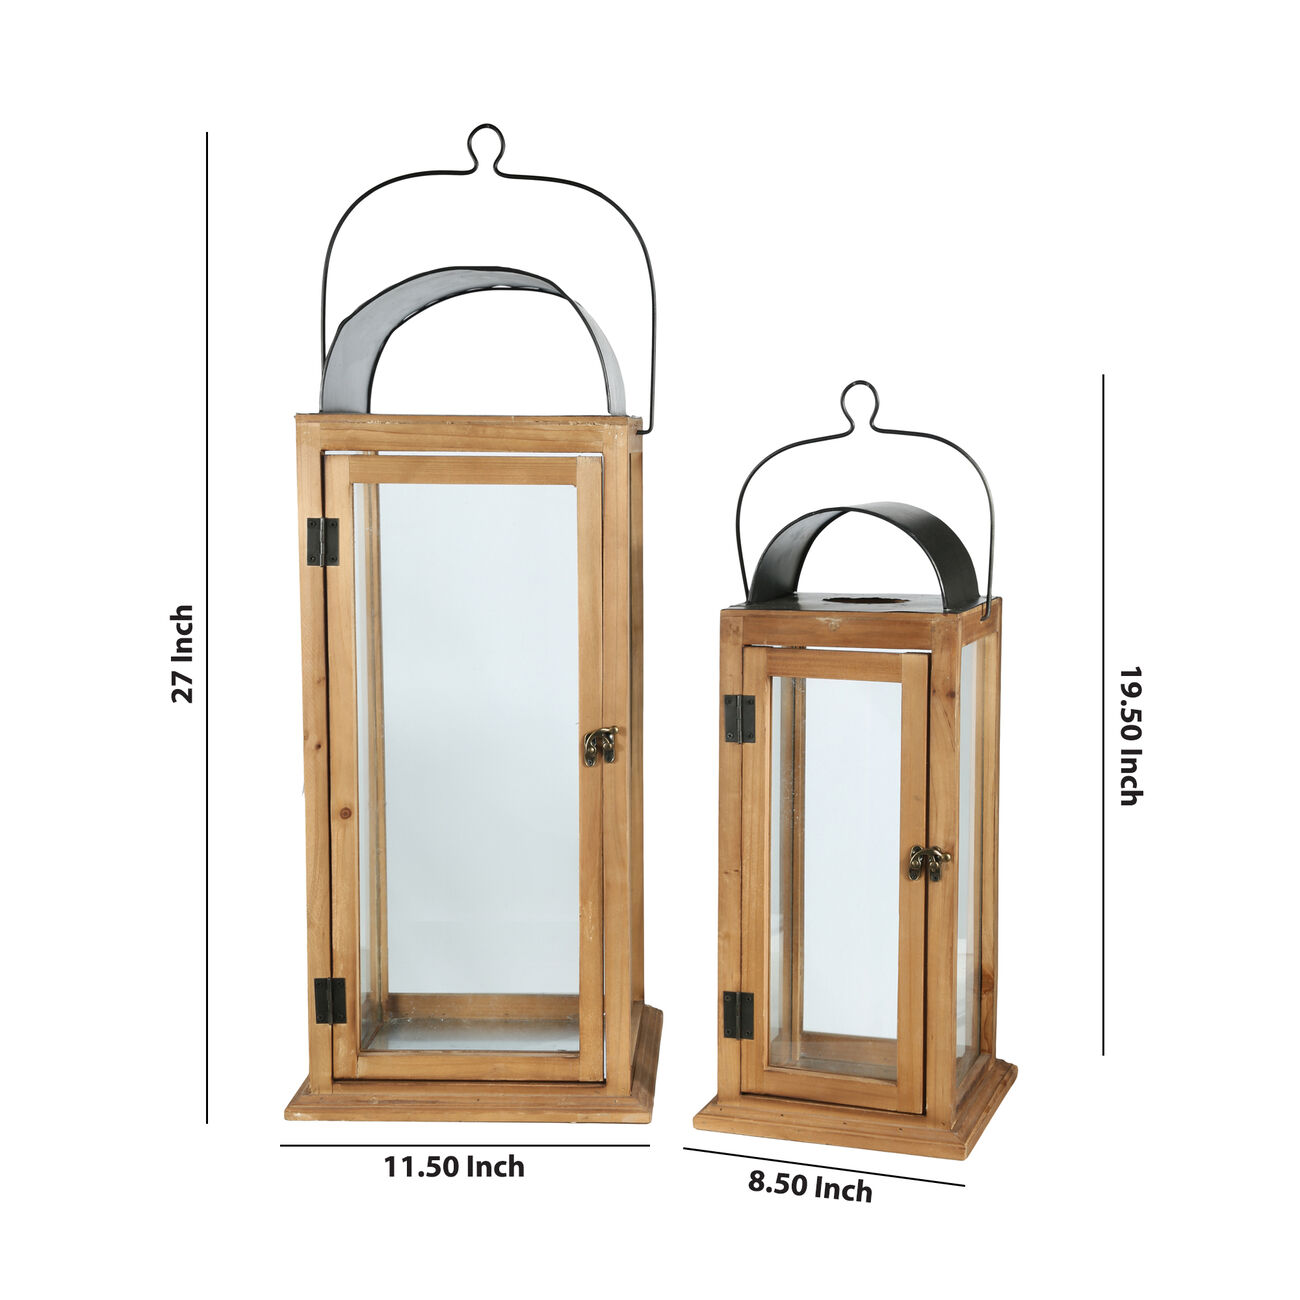 Wood and Glass Lanterns with Latched Door, Brown and Black, Set of 2